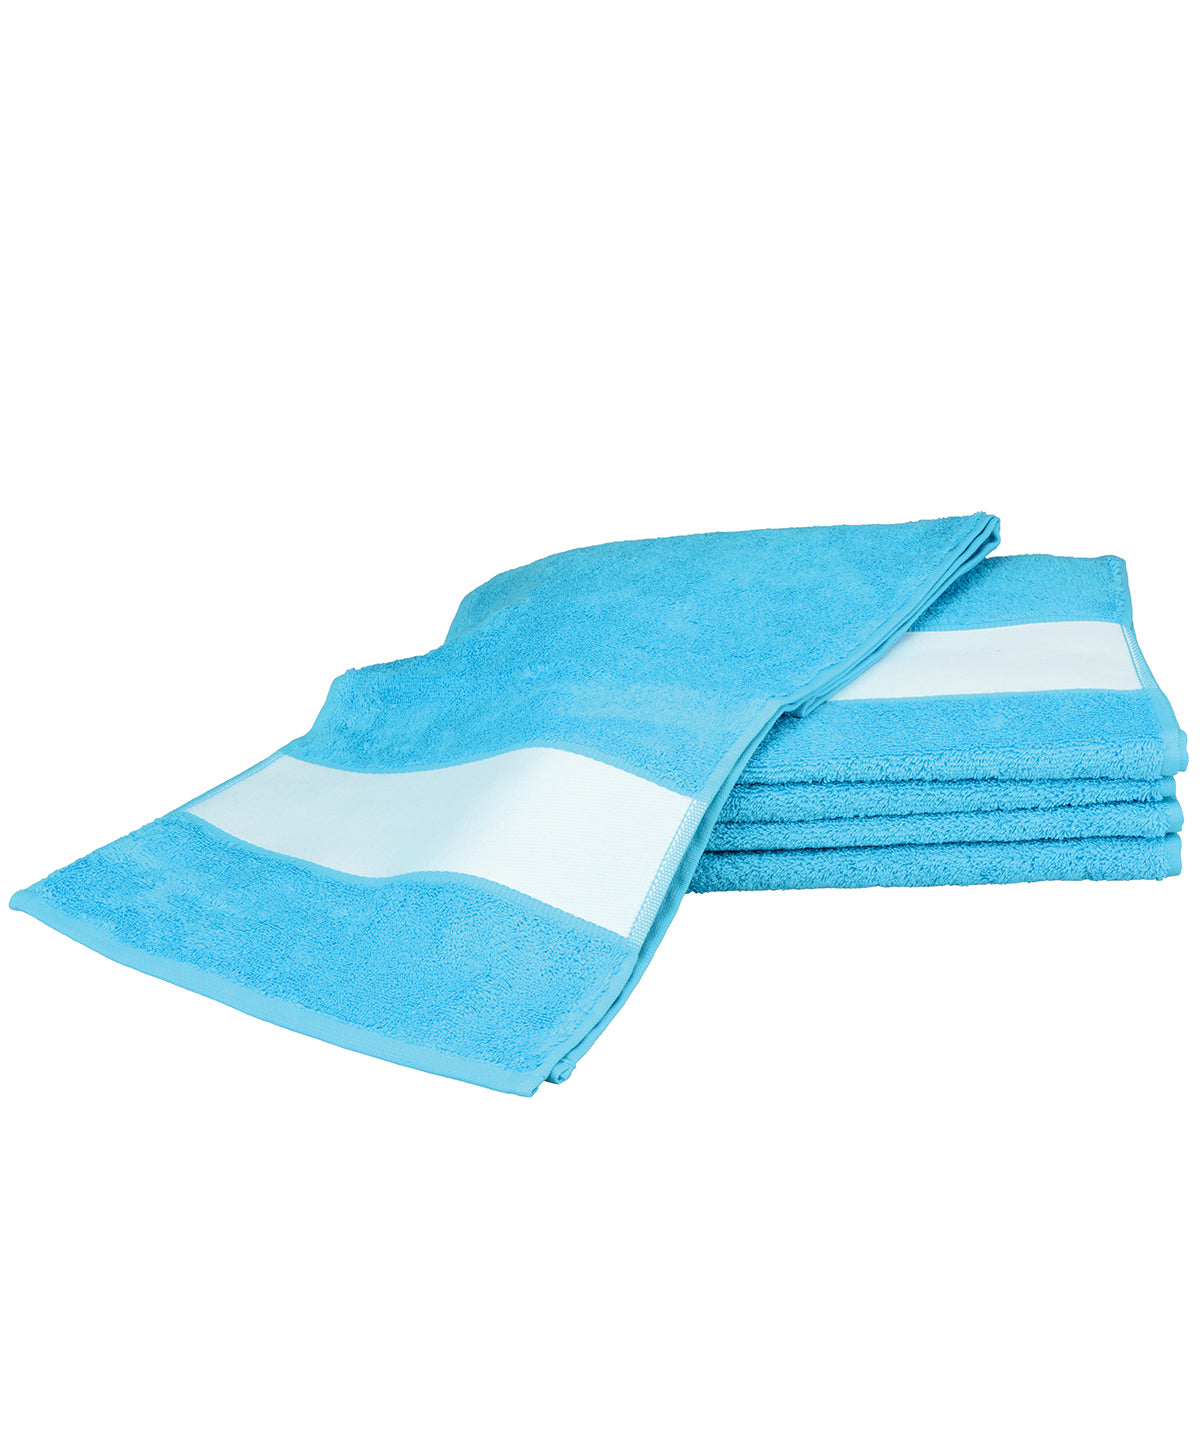 Personalised Towels - Turquoise A&R Towels ARTG® SUBLI-Me® sport towel